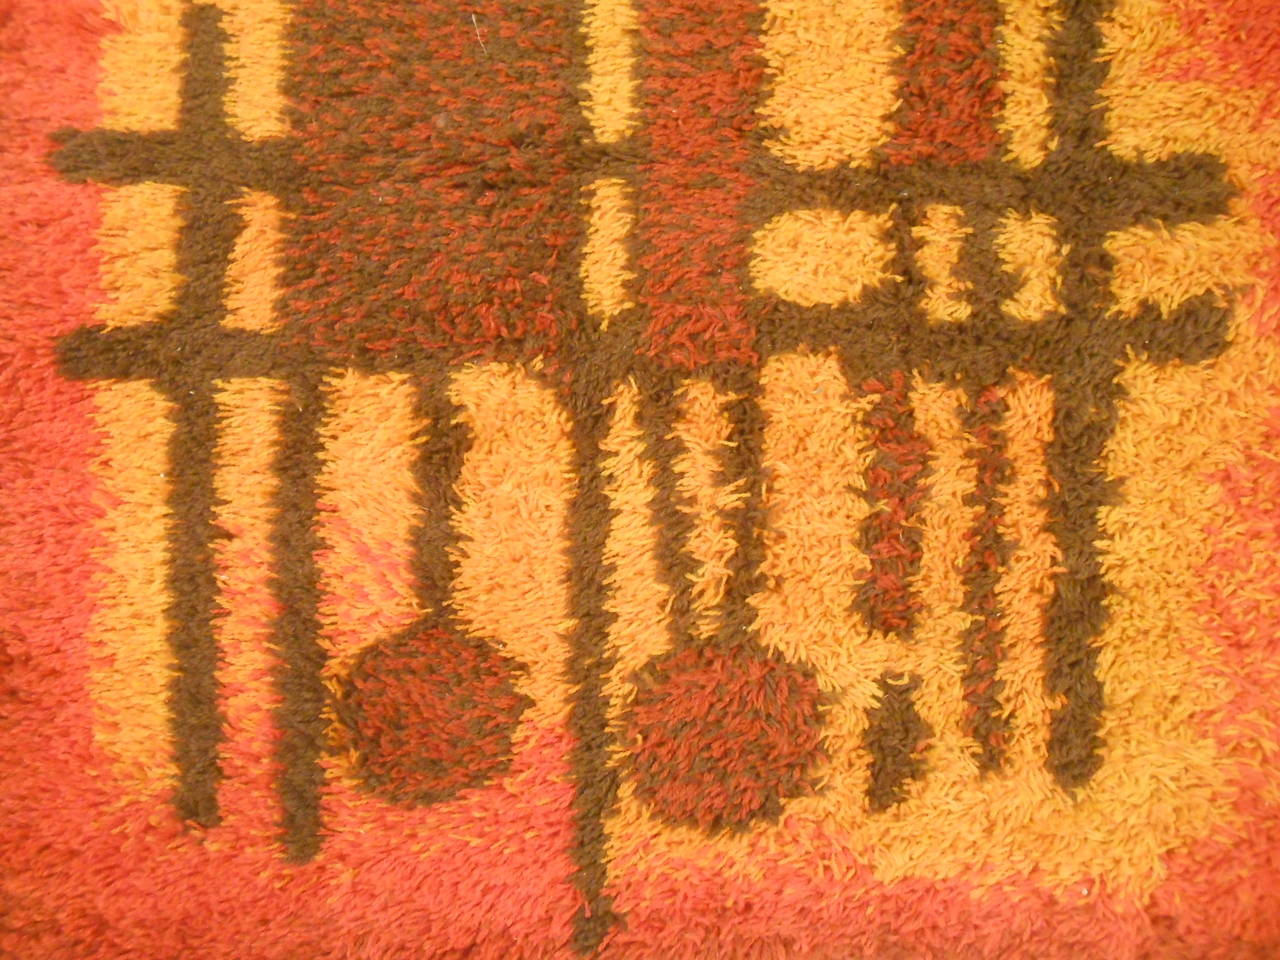 Wild shag rug with vibrant orange hues and 1960s abstract pattern. Unique mid-century modern style area rug adds bright color and vintage modern style to any interior.

(Please confirm item location - NY or NJ - with dealer)